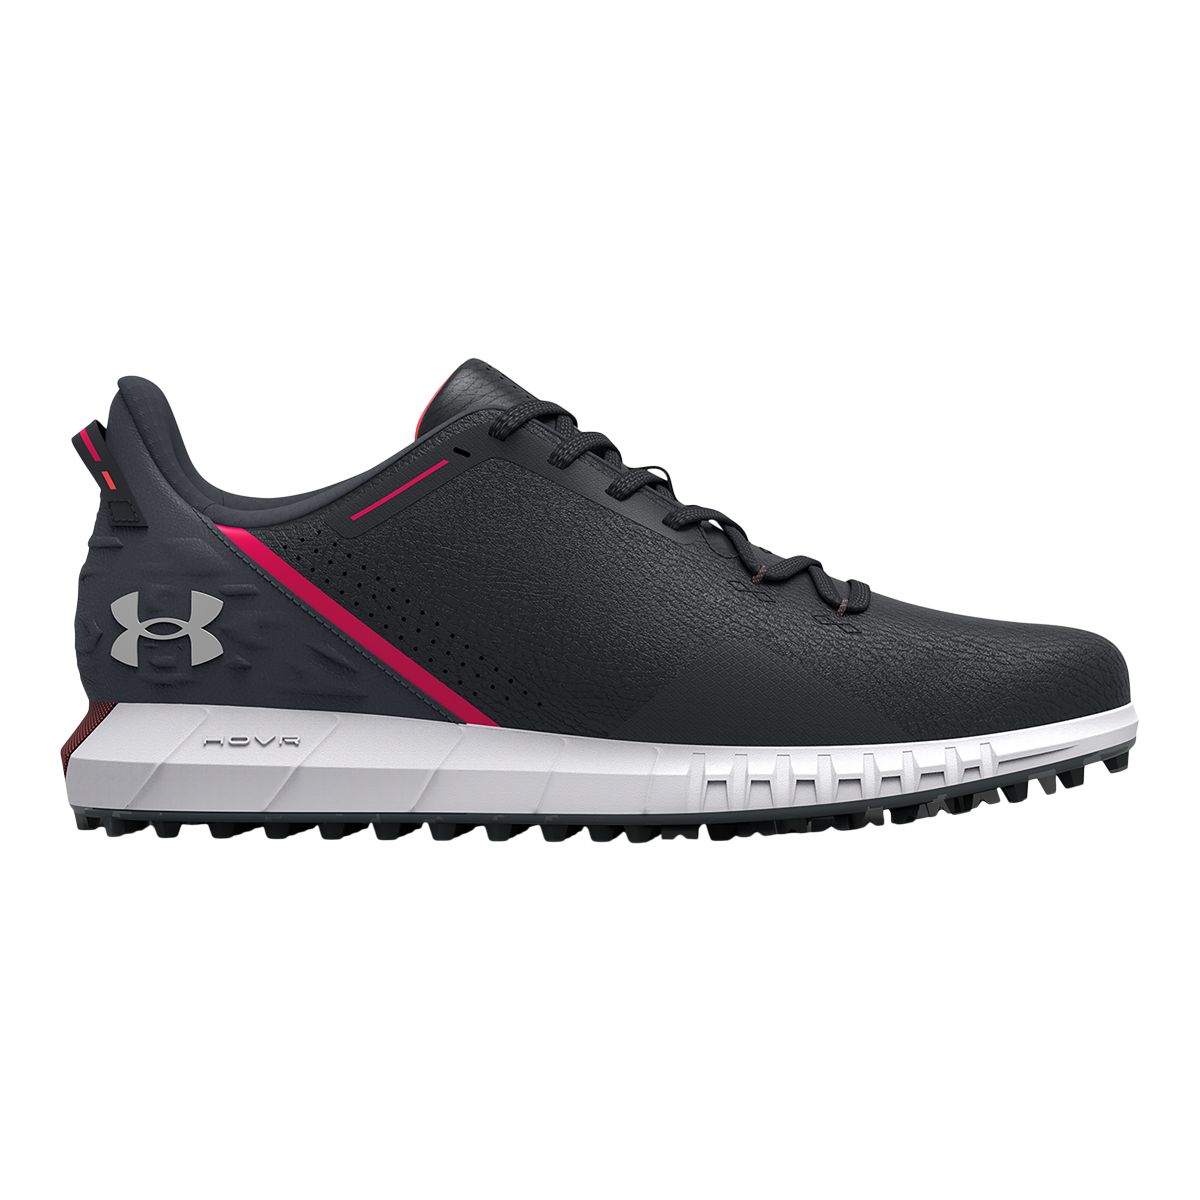 Under Armour Men's HOVR Drive SL Golf Shoes, Spiked | SportChek